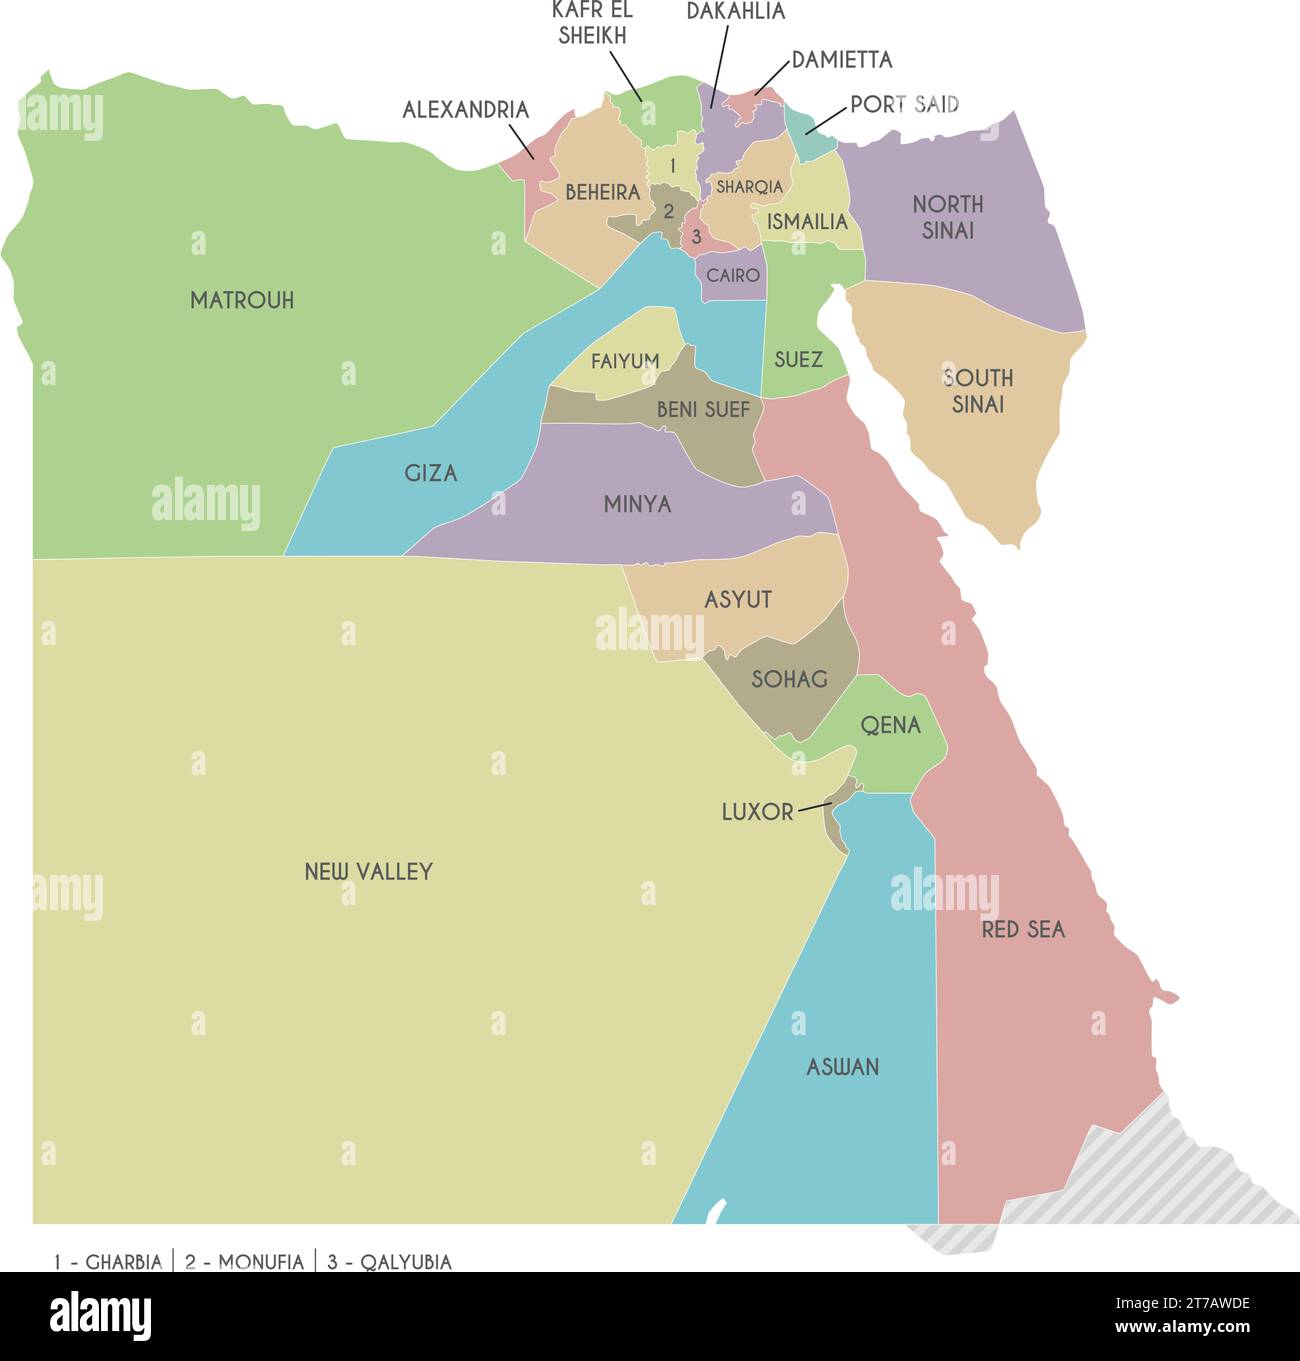 Vector map of Egypt with governorates or provinces and administrative divisions. Editable and clearly labeled layers. Stock Vector